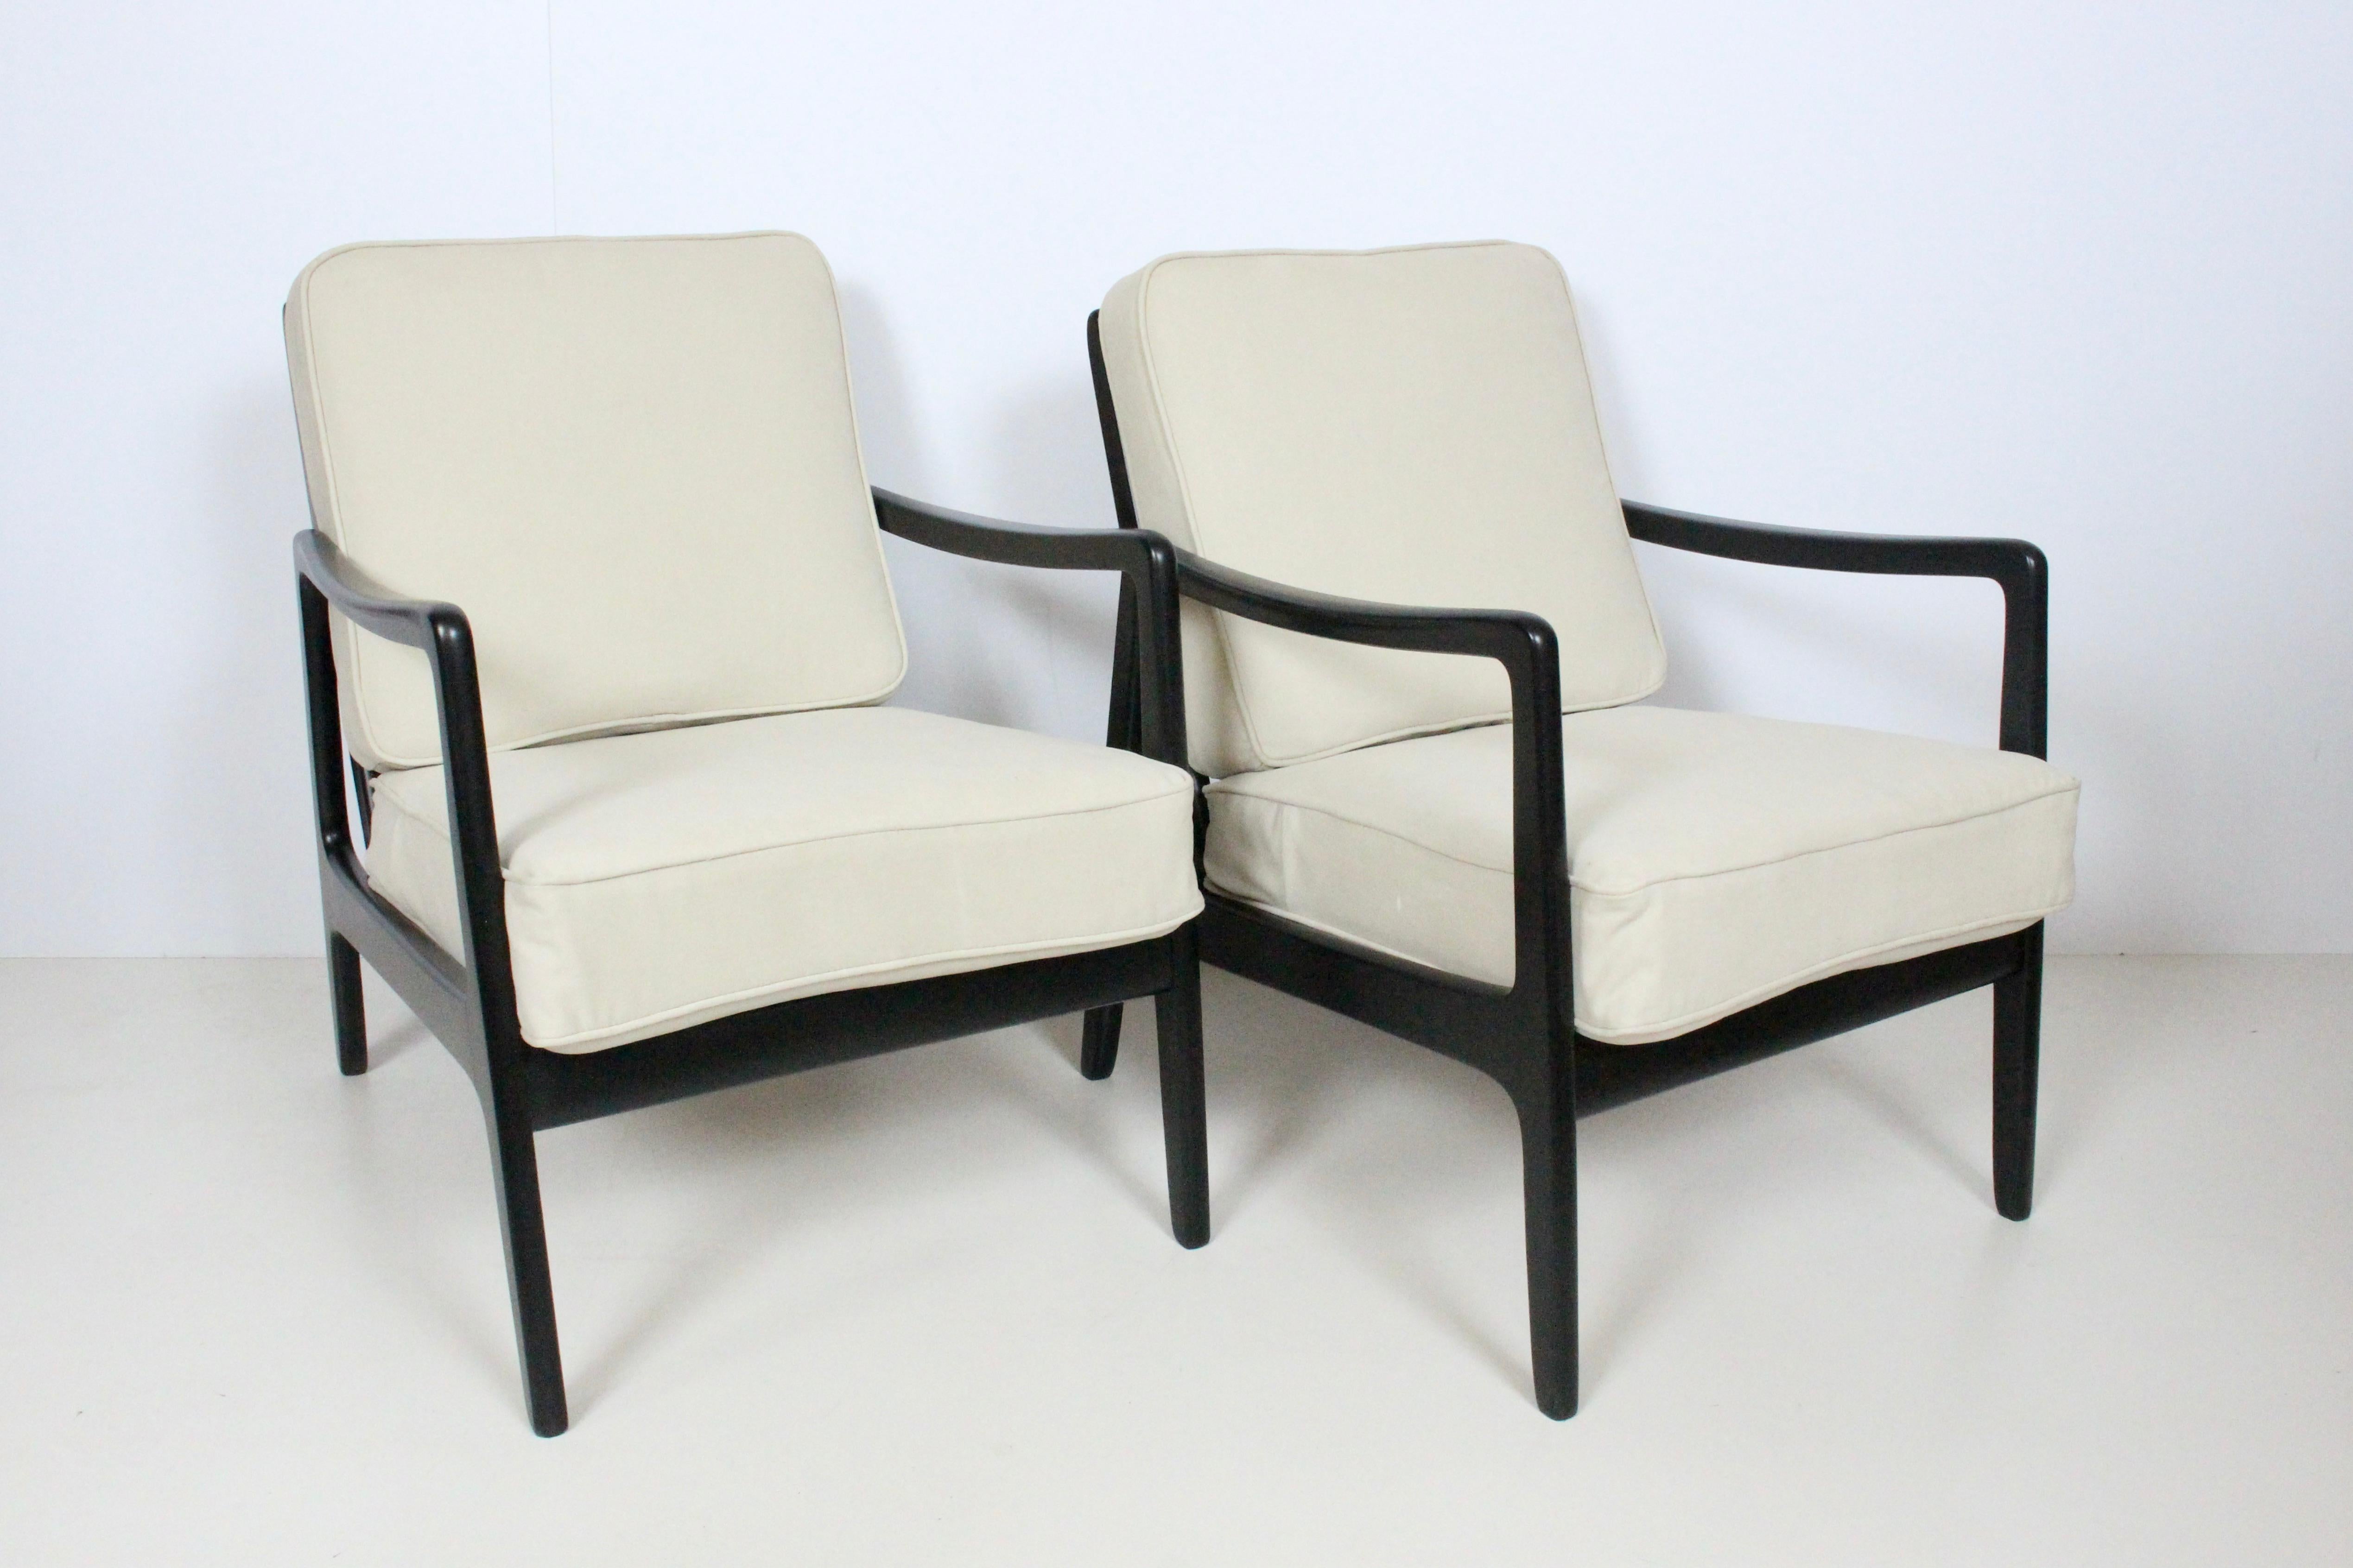 Enameled Early Pair of Ole Wanscher Ebonized Mahogany Lounge Chairs, 1950's For Sale